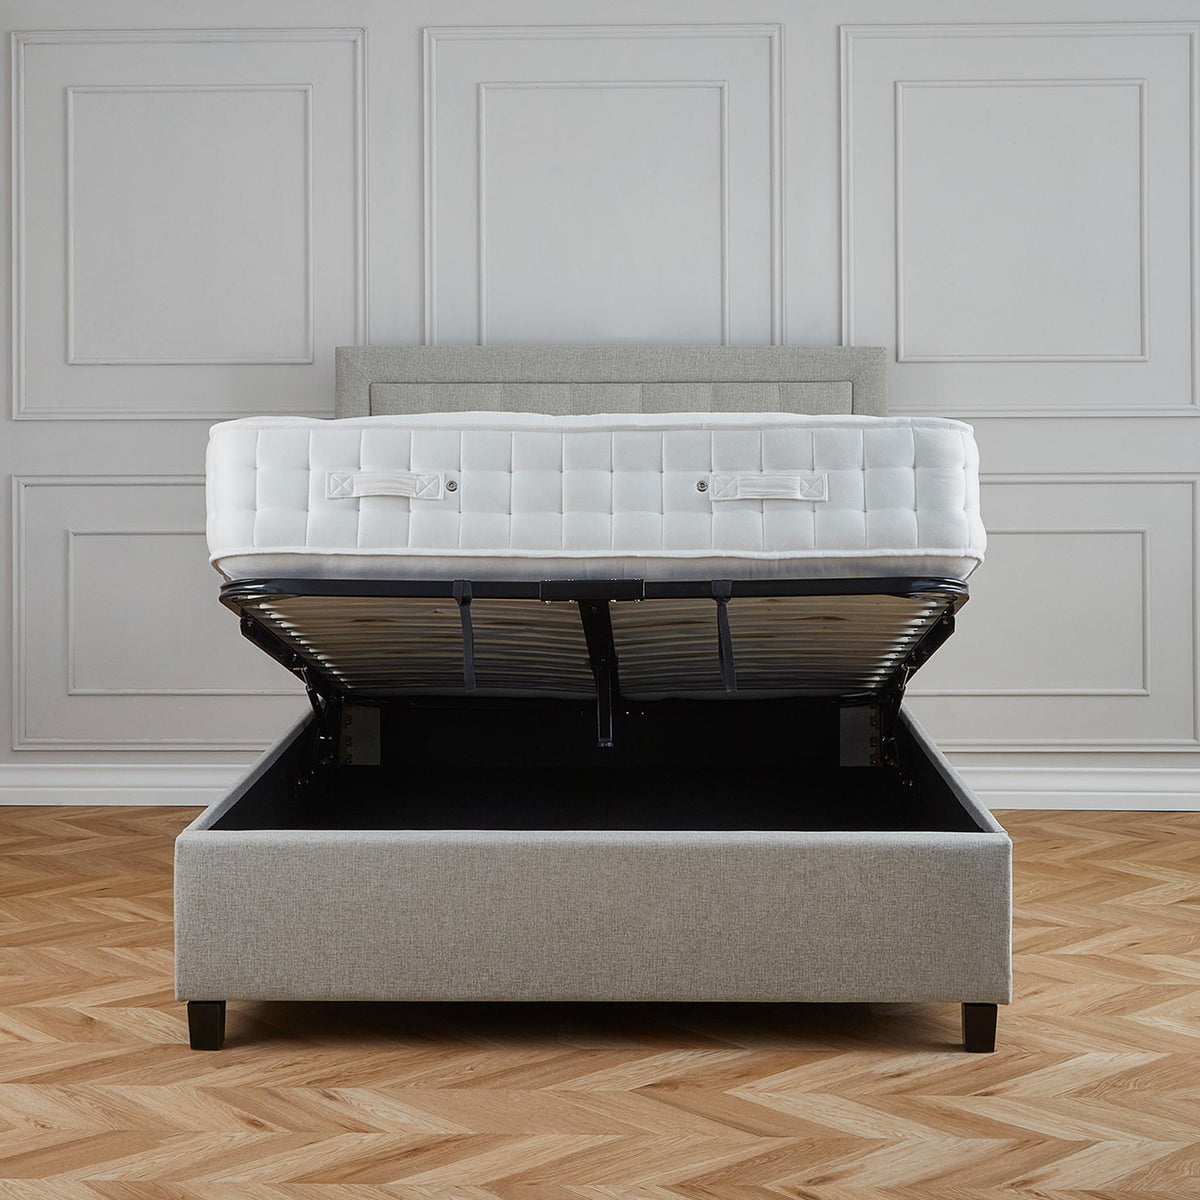 Ashley Oatmeal Upholstered Ottoman Storage Bed 